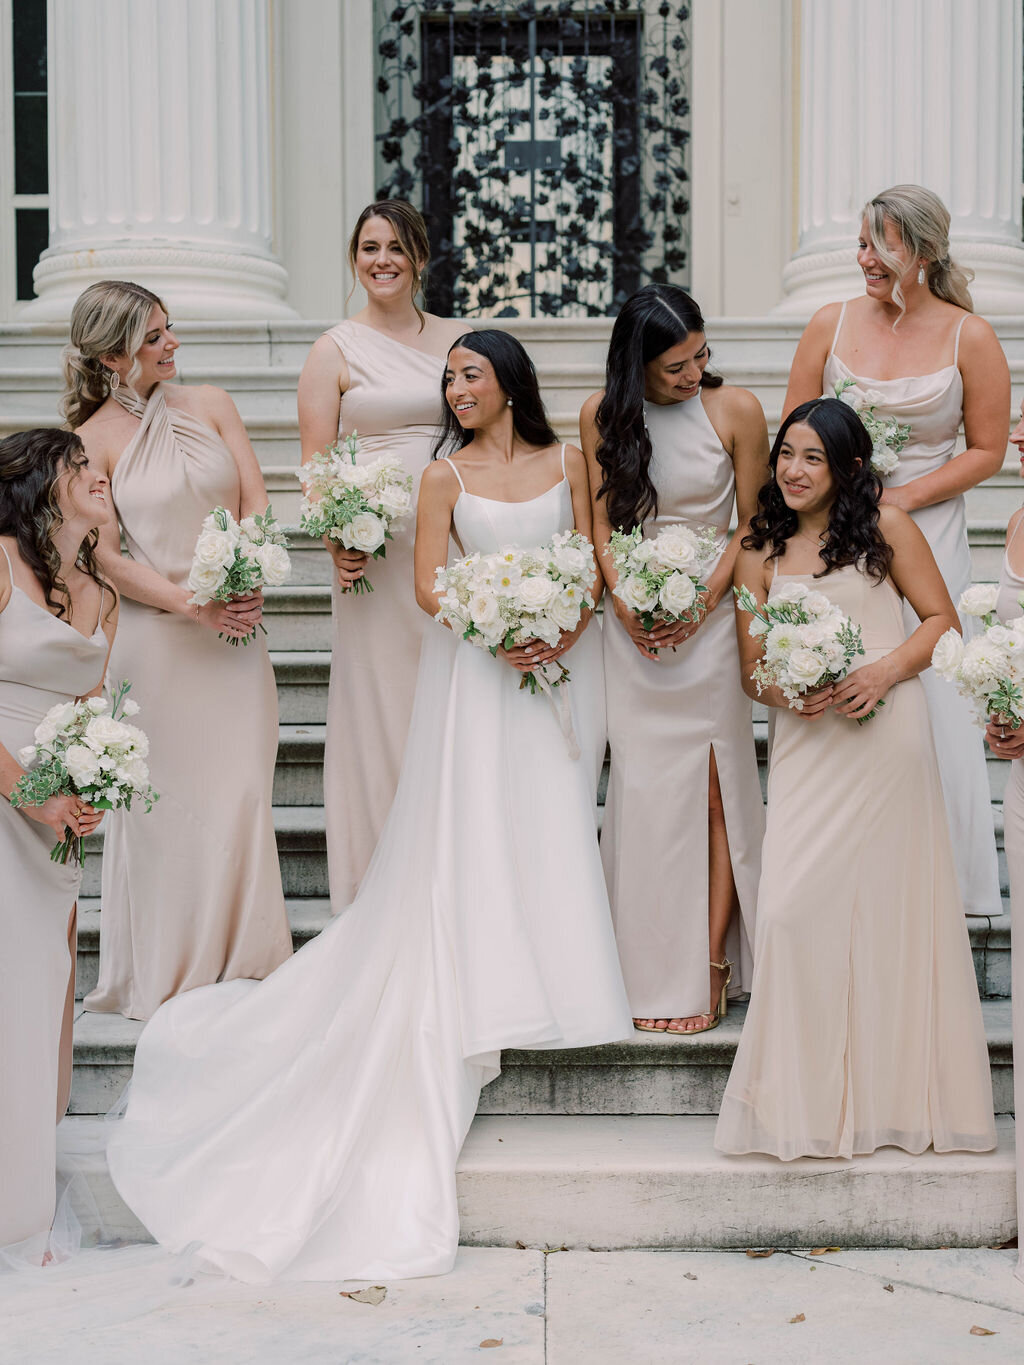 Bridal party holding white bouquets with white garden roses, white Japanese anemone, white dahlia, and white quick-fire hydrangea wearing champagne-colored silk slip dresses.